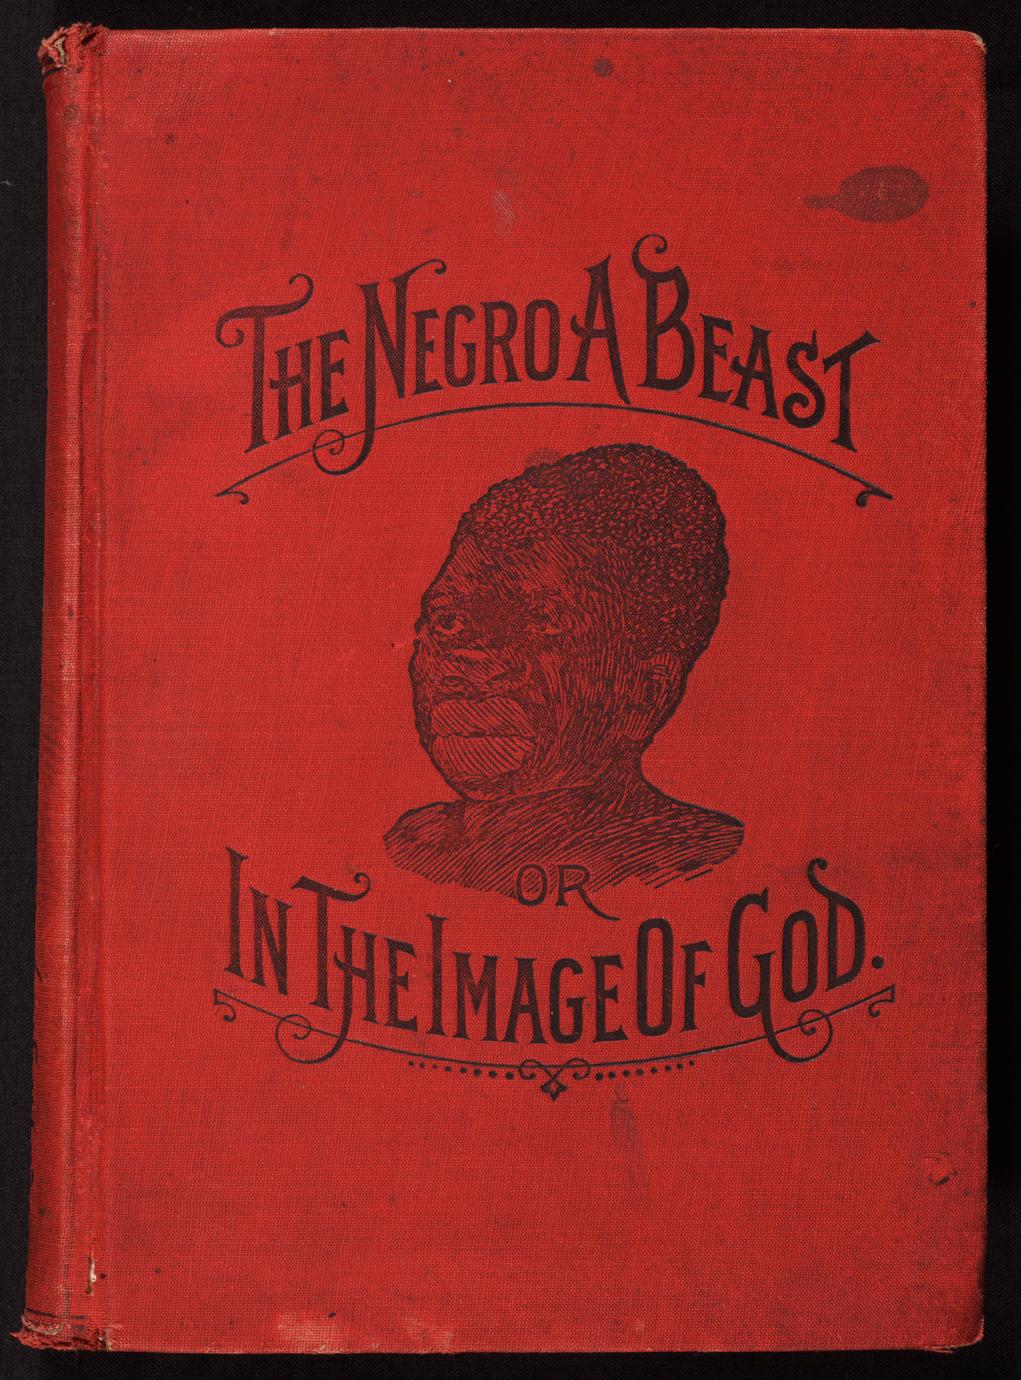 "The negro a beast" ; or, "In the image of God"; the reasoner of the age, the revelator of the century! The Bible as it is! The negro and his relation to the human family!...The negro not the son of Ham... (1 of 3)